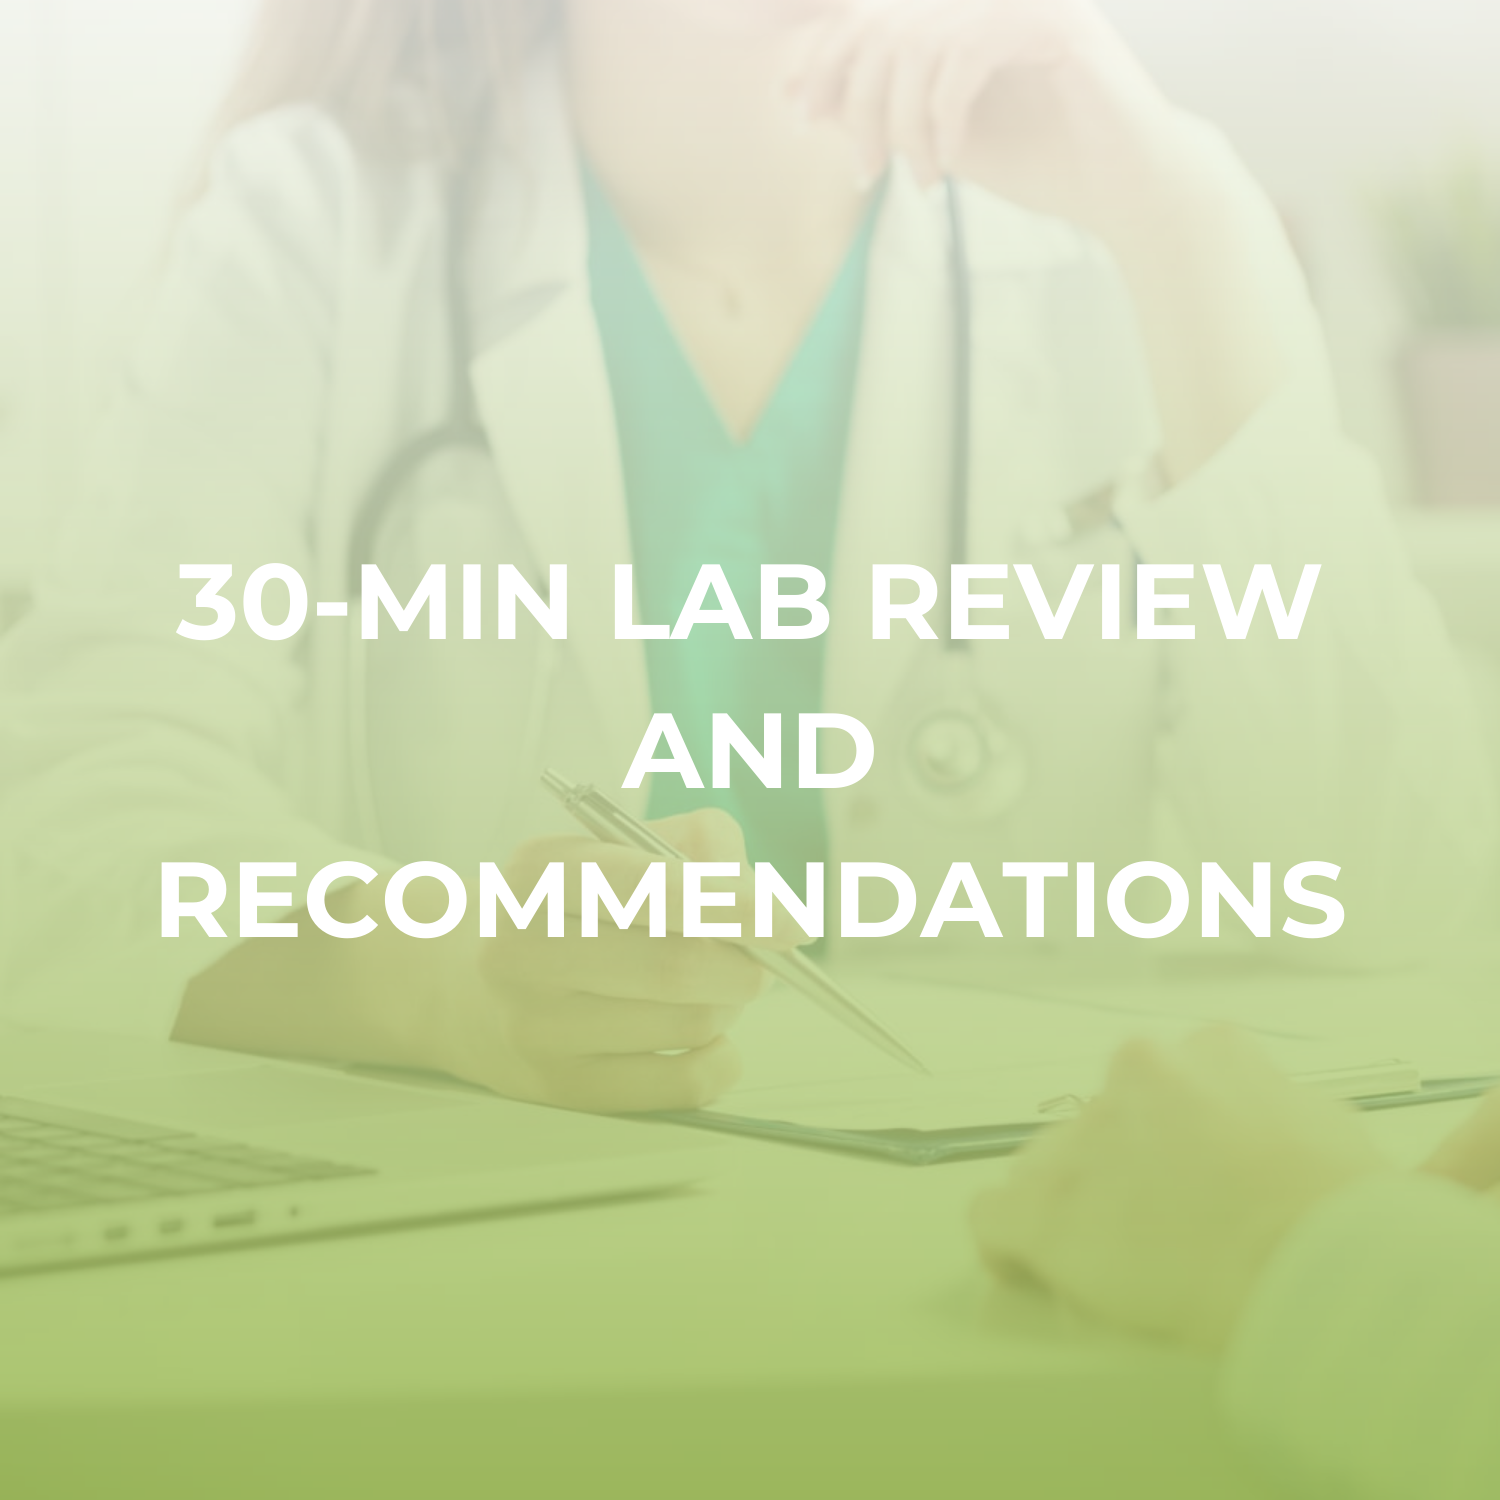 30-Min Lab Review and Recommendations